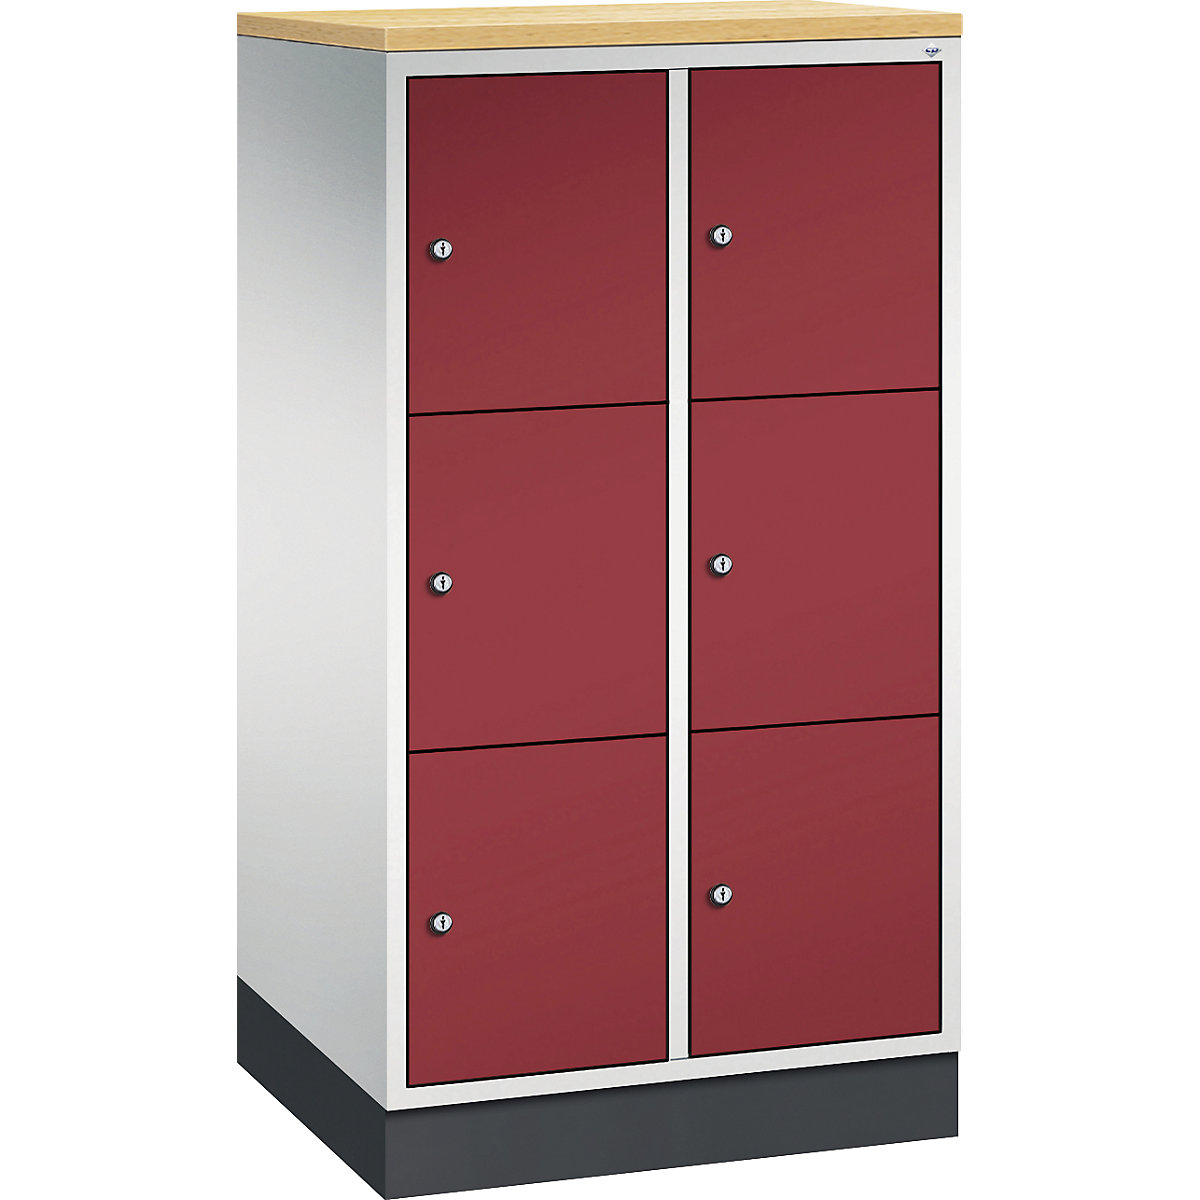 INTRO steel compartment locker, compartment height 345 mm – C+P, WxD 620 x 500 mm, 6 compartments, light grey body, ruby red doors